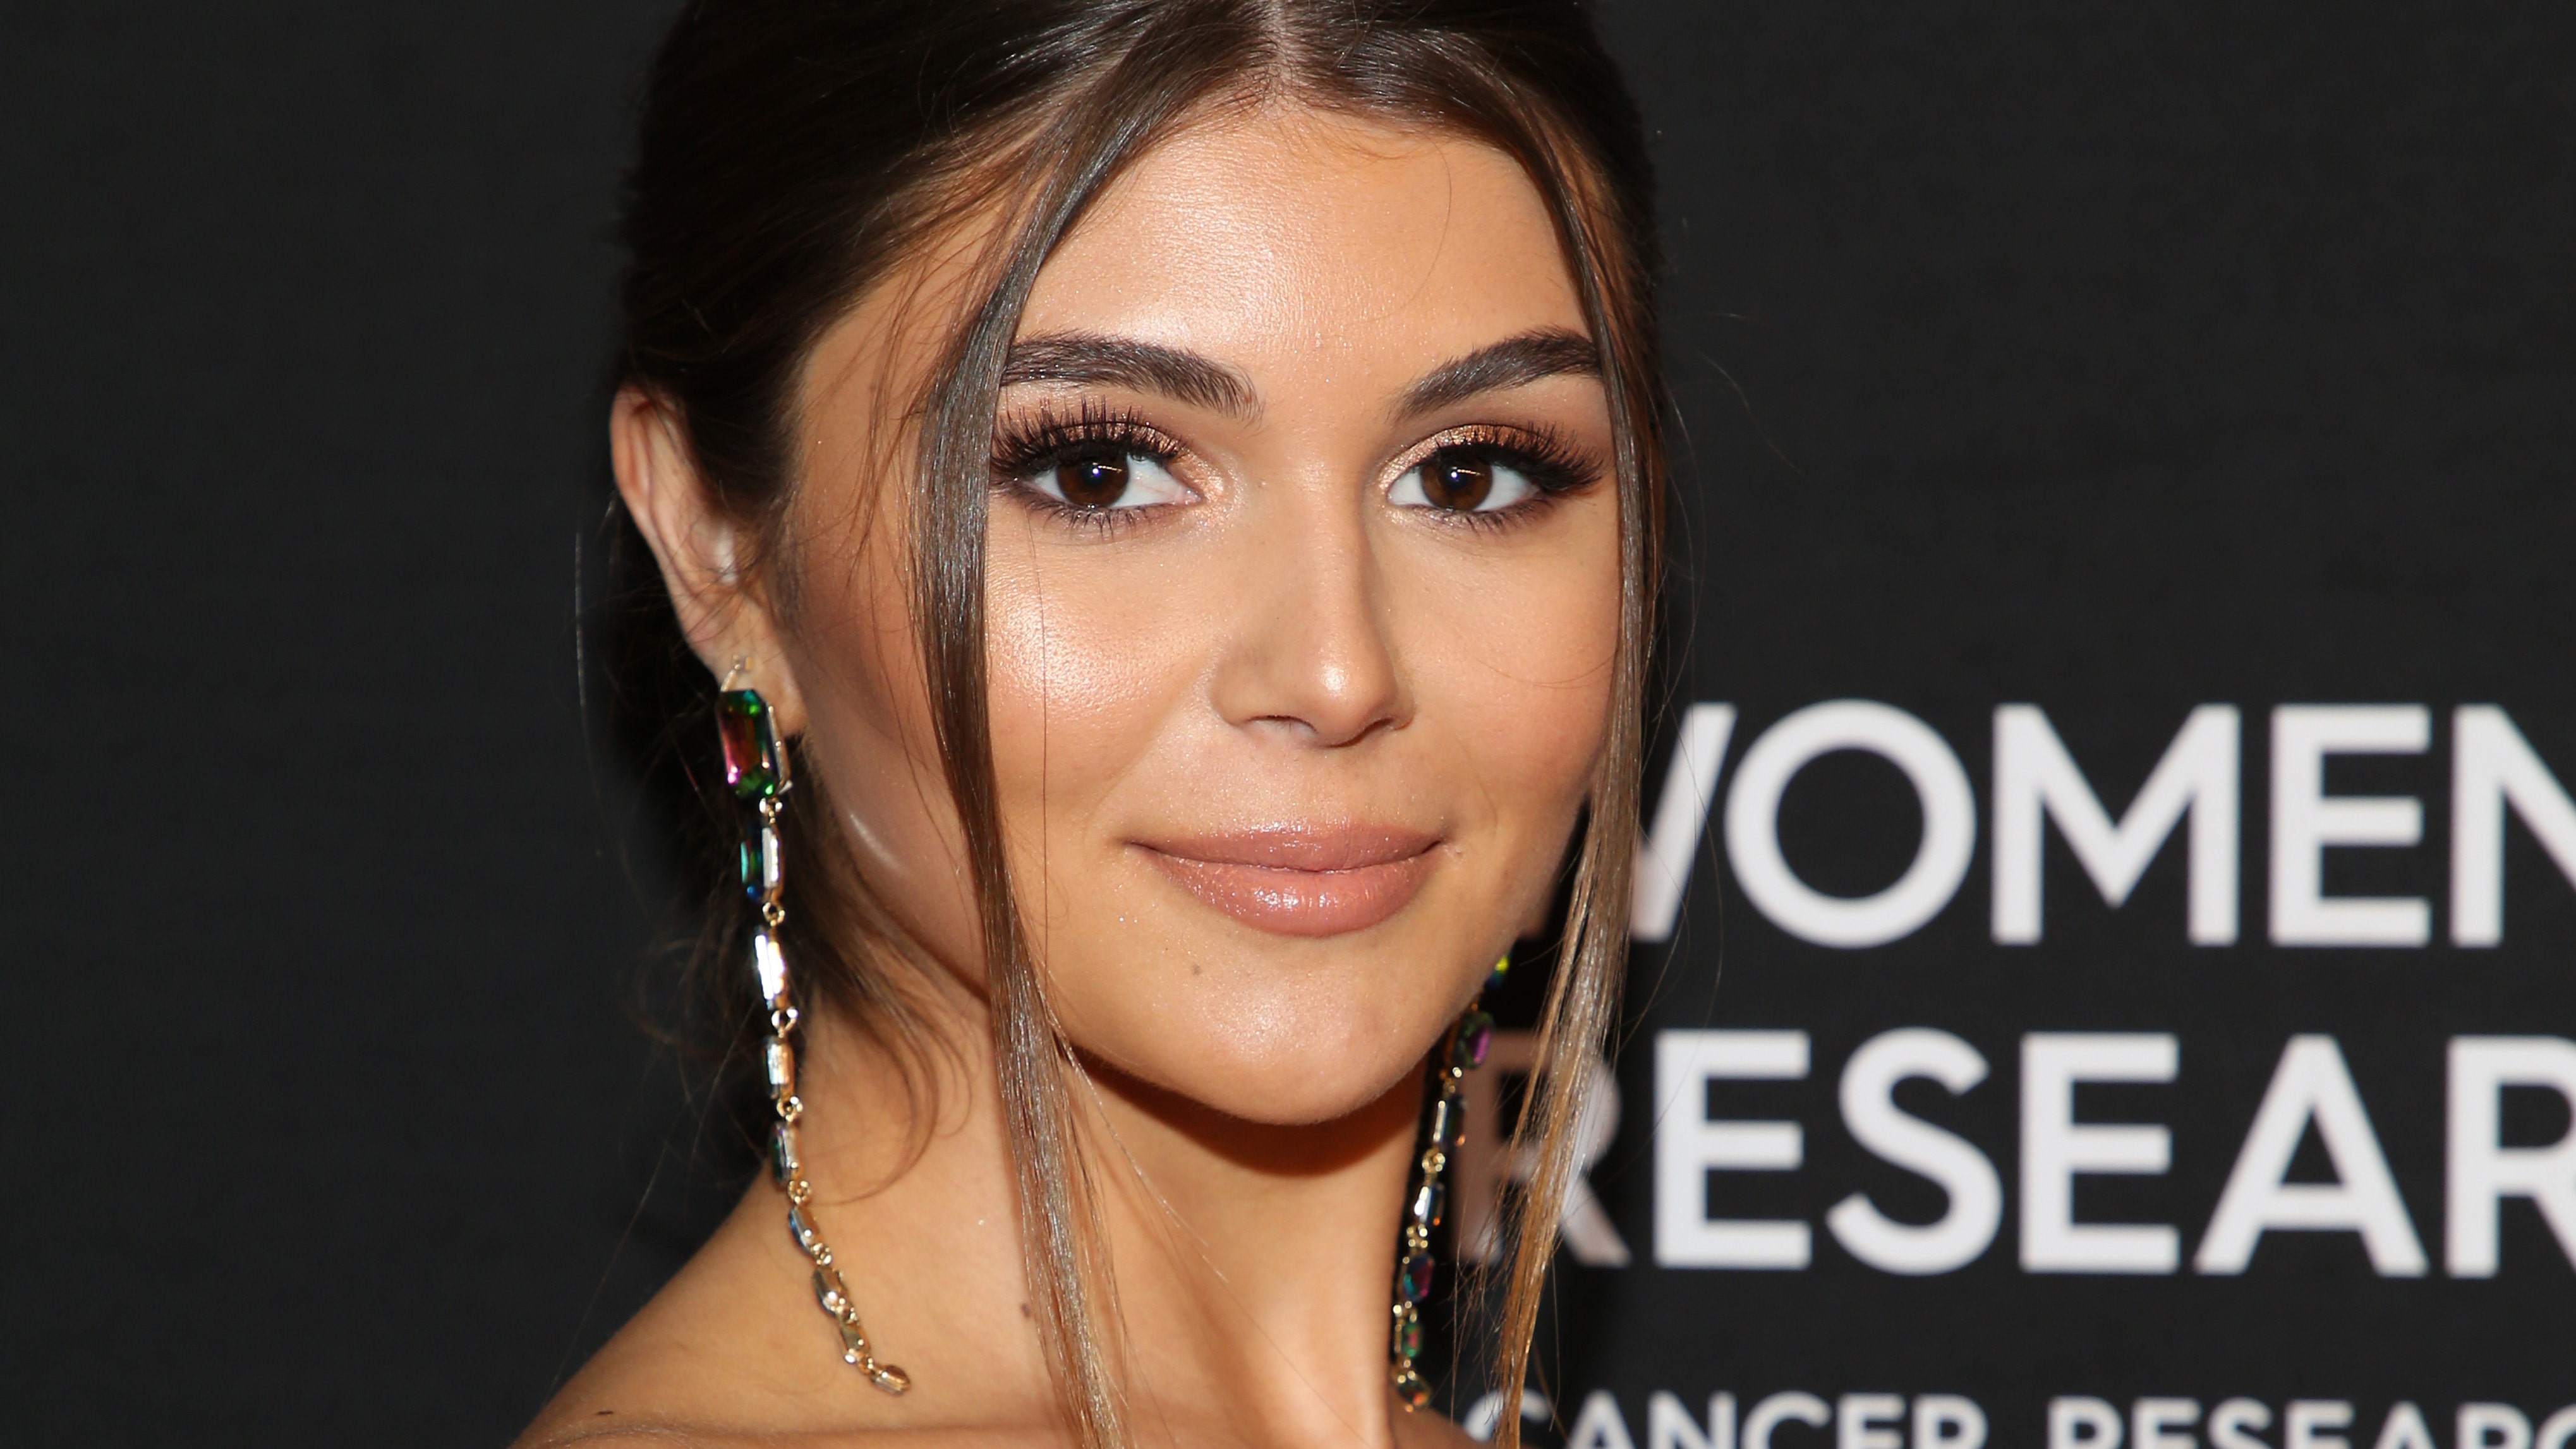 Olivia Jade rumored to be joining 'Dancing with the Stars'